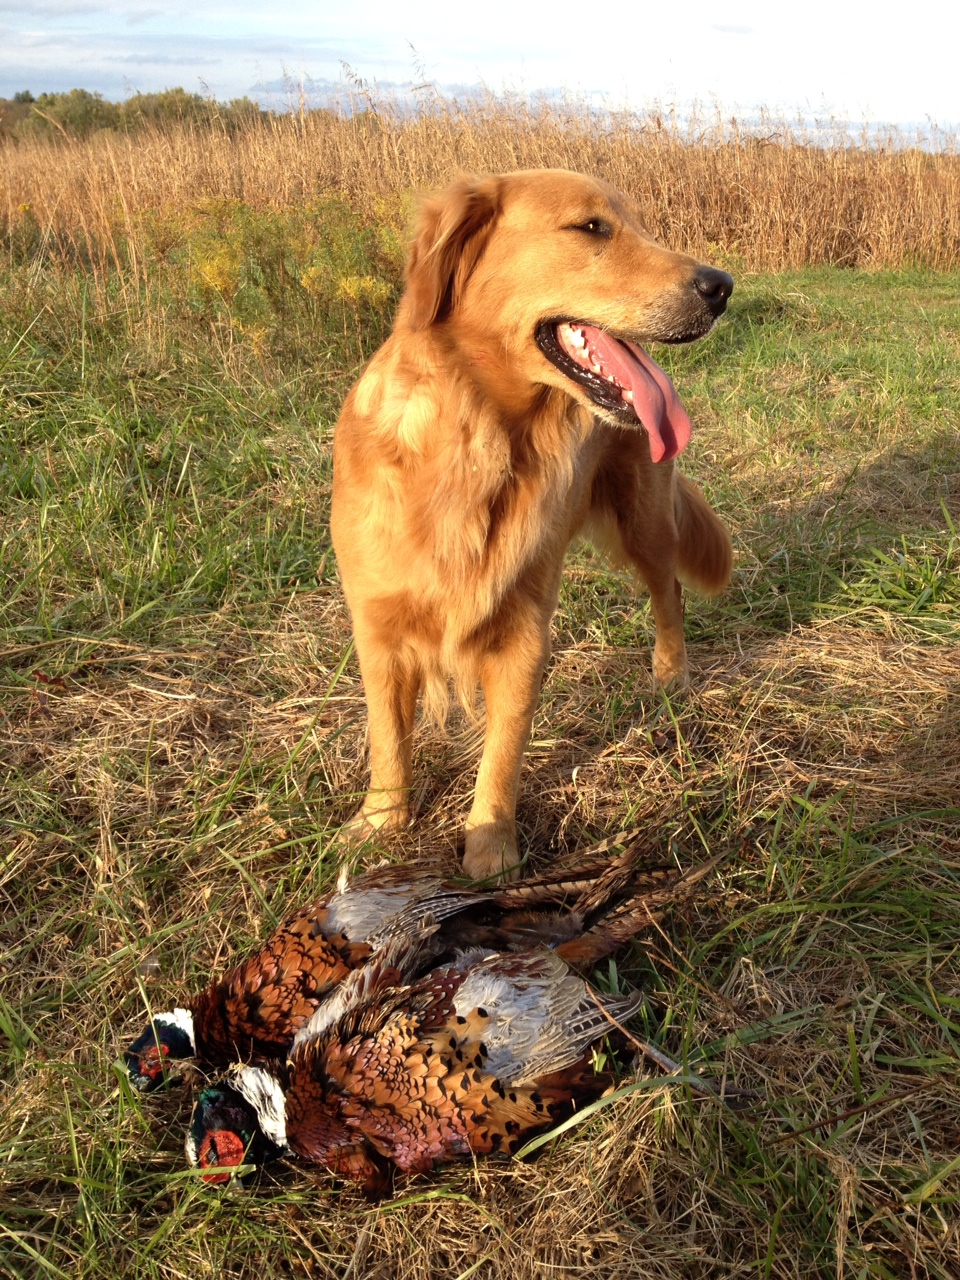 Brady the golden retriever, a world class hunting dog hunting in New Jersey, stands proudly over retrieved birds